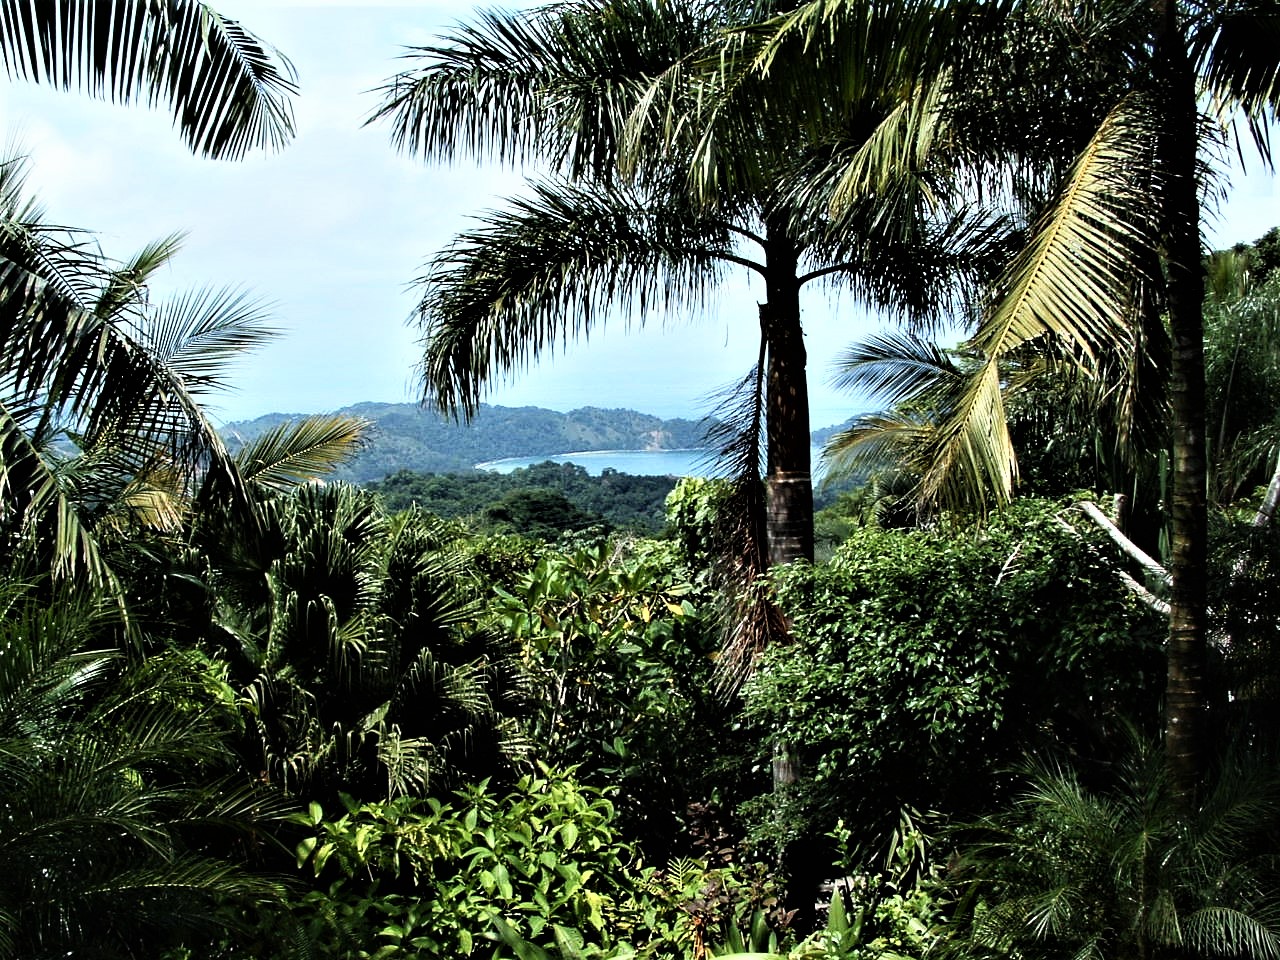 View to the pacific ocean in Costa Rica